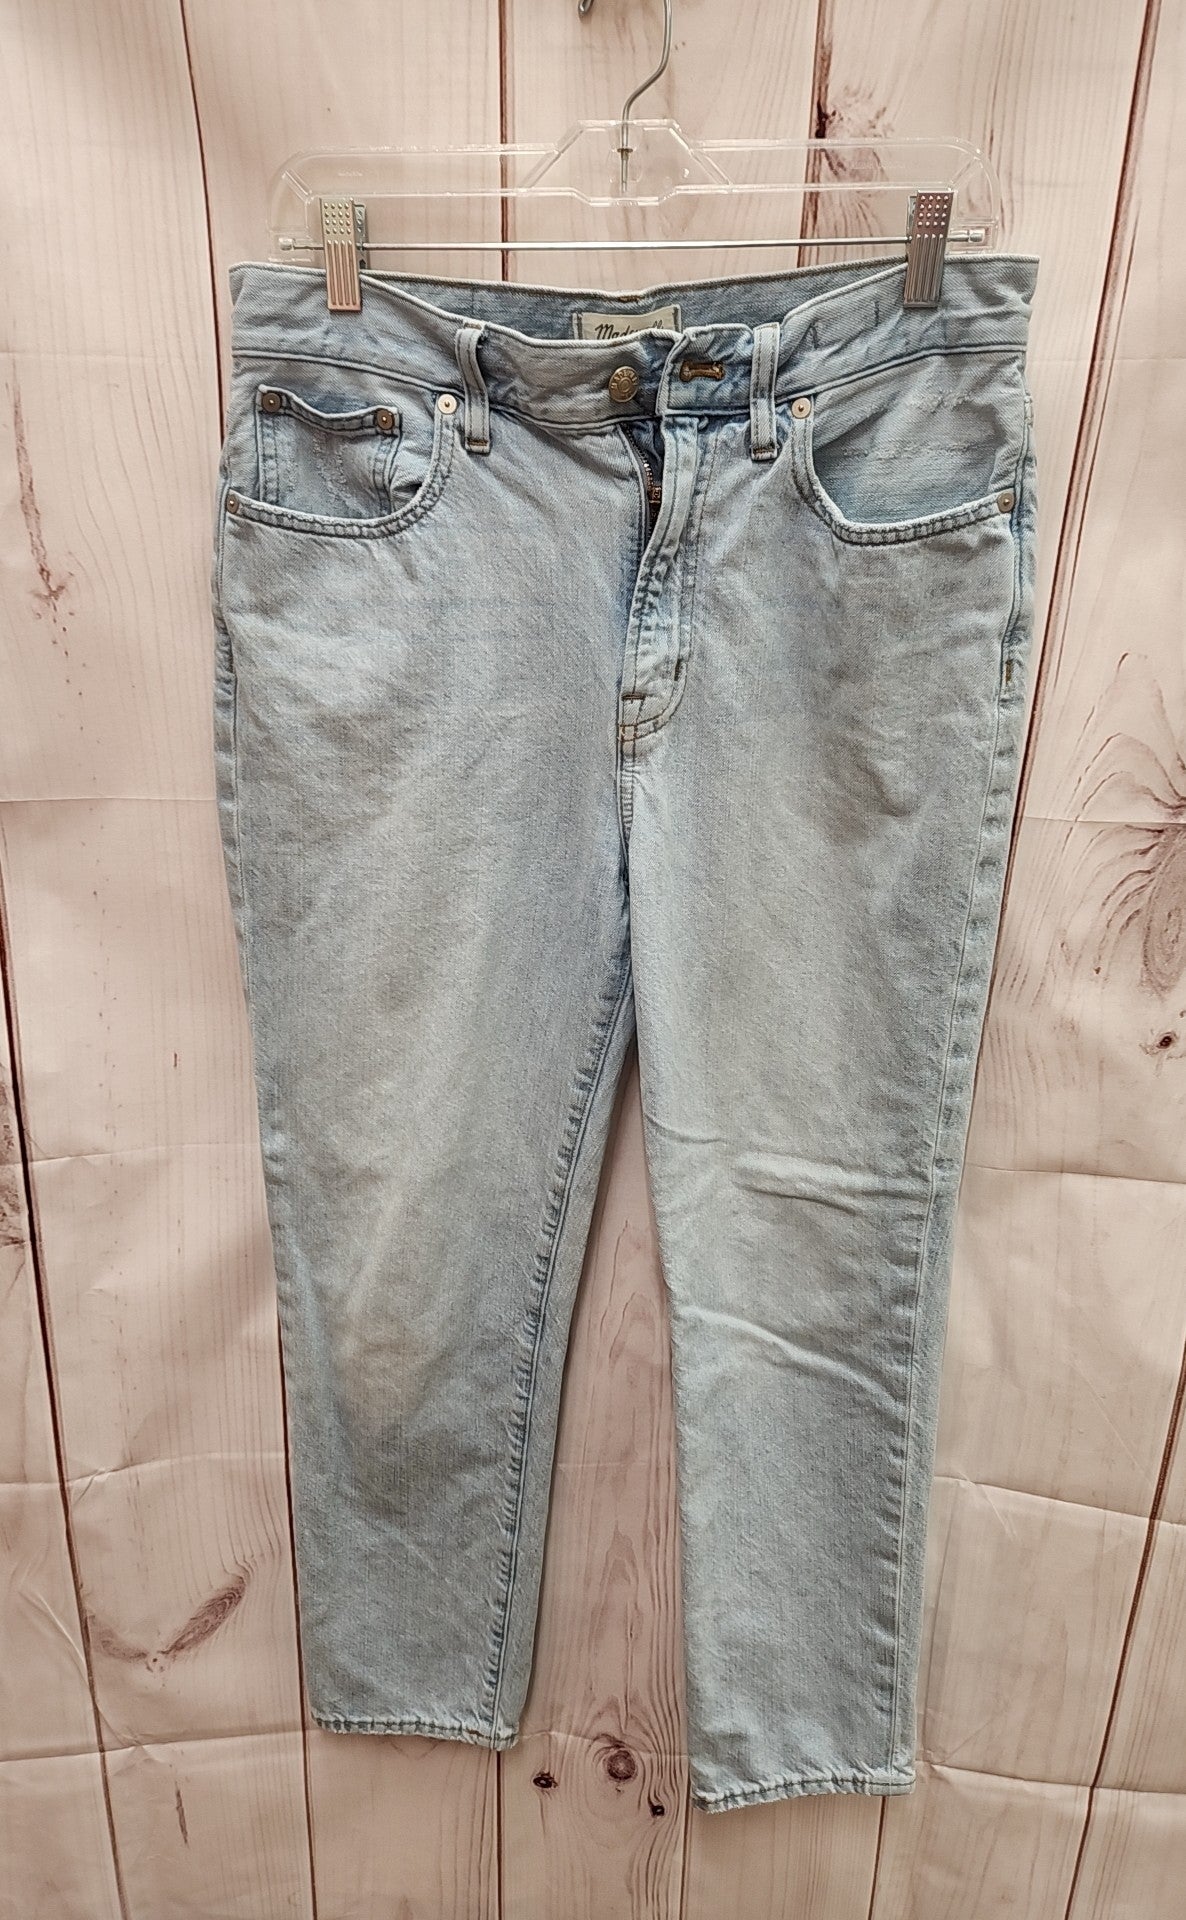 Madewell Women's Size 29 (7-8) The Perfect Vintage Jean Blue Jeans